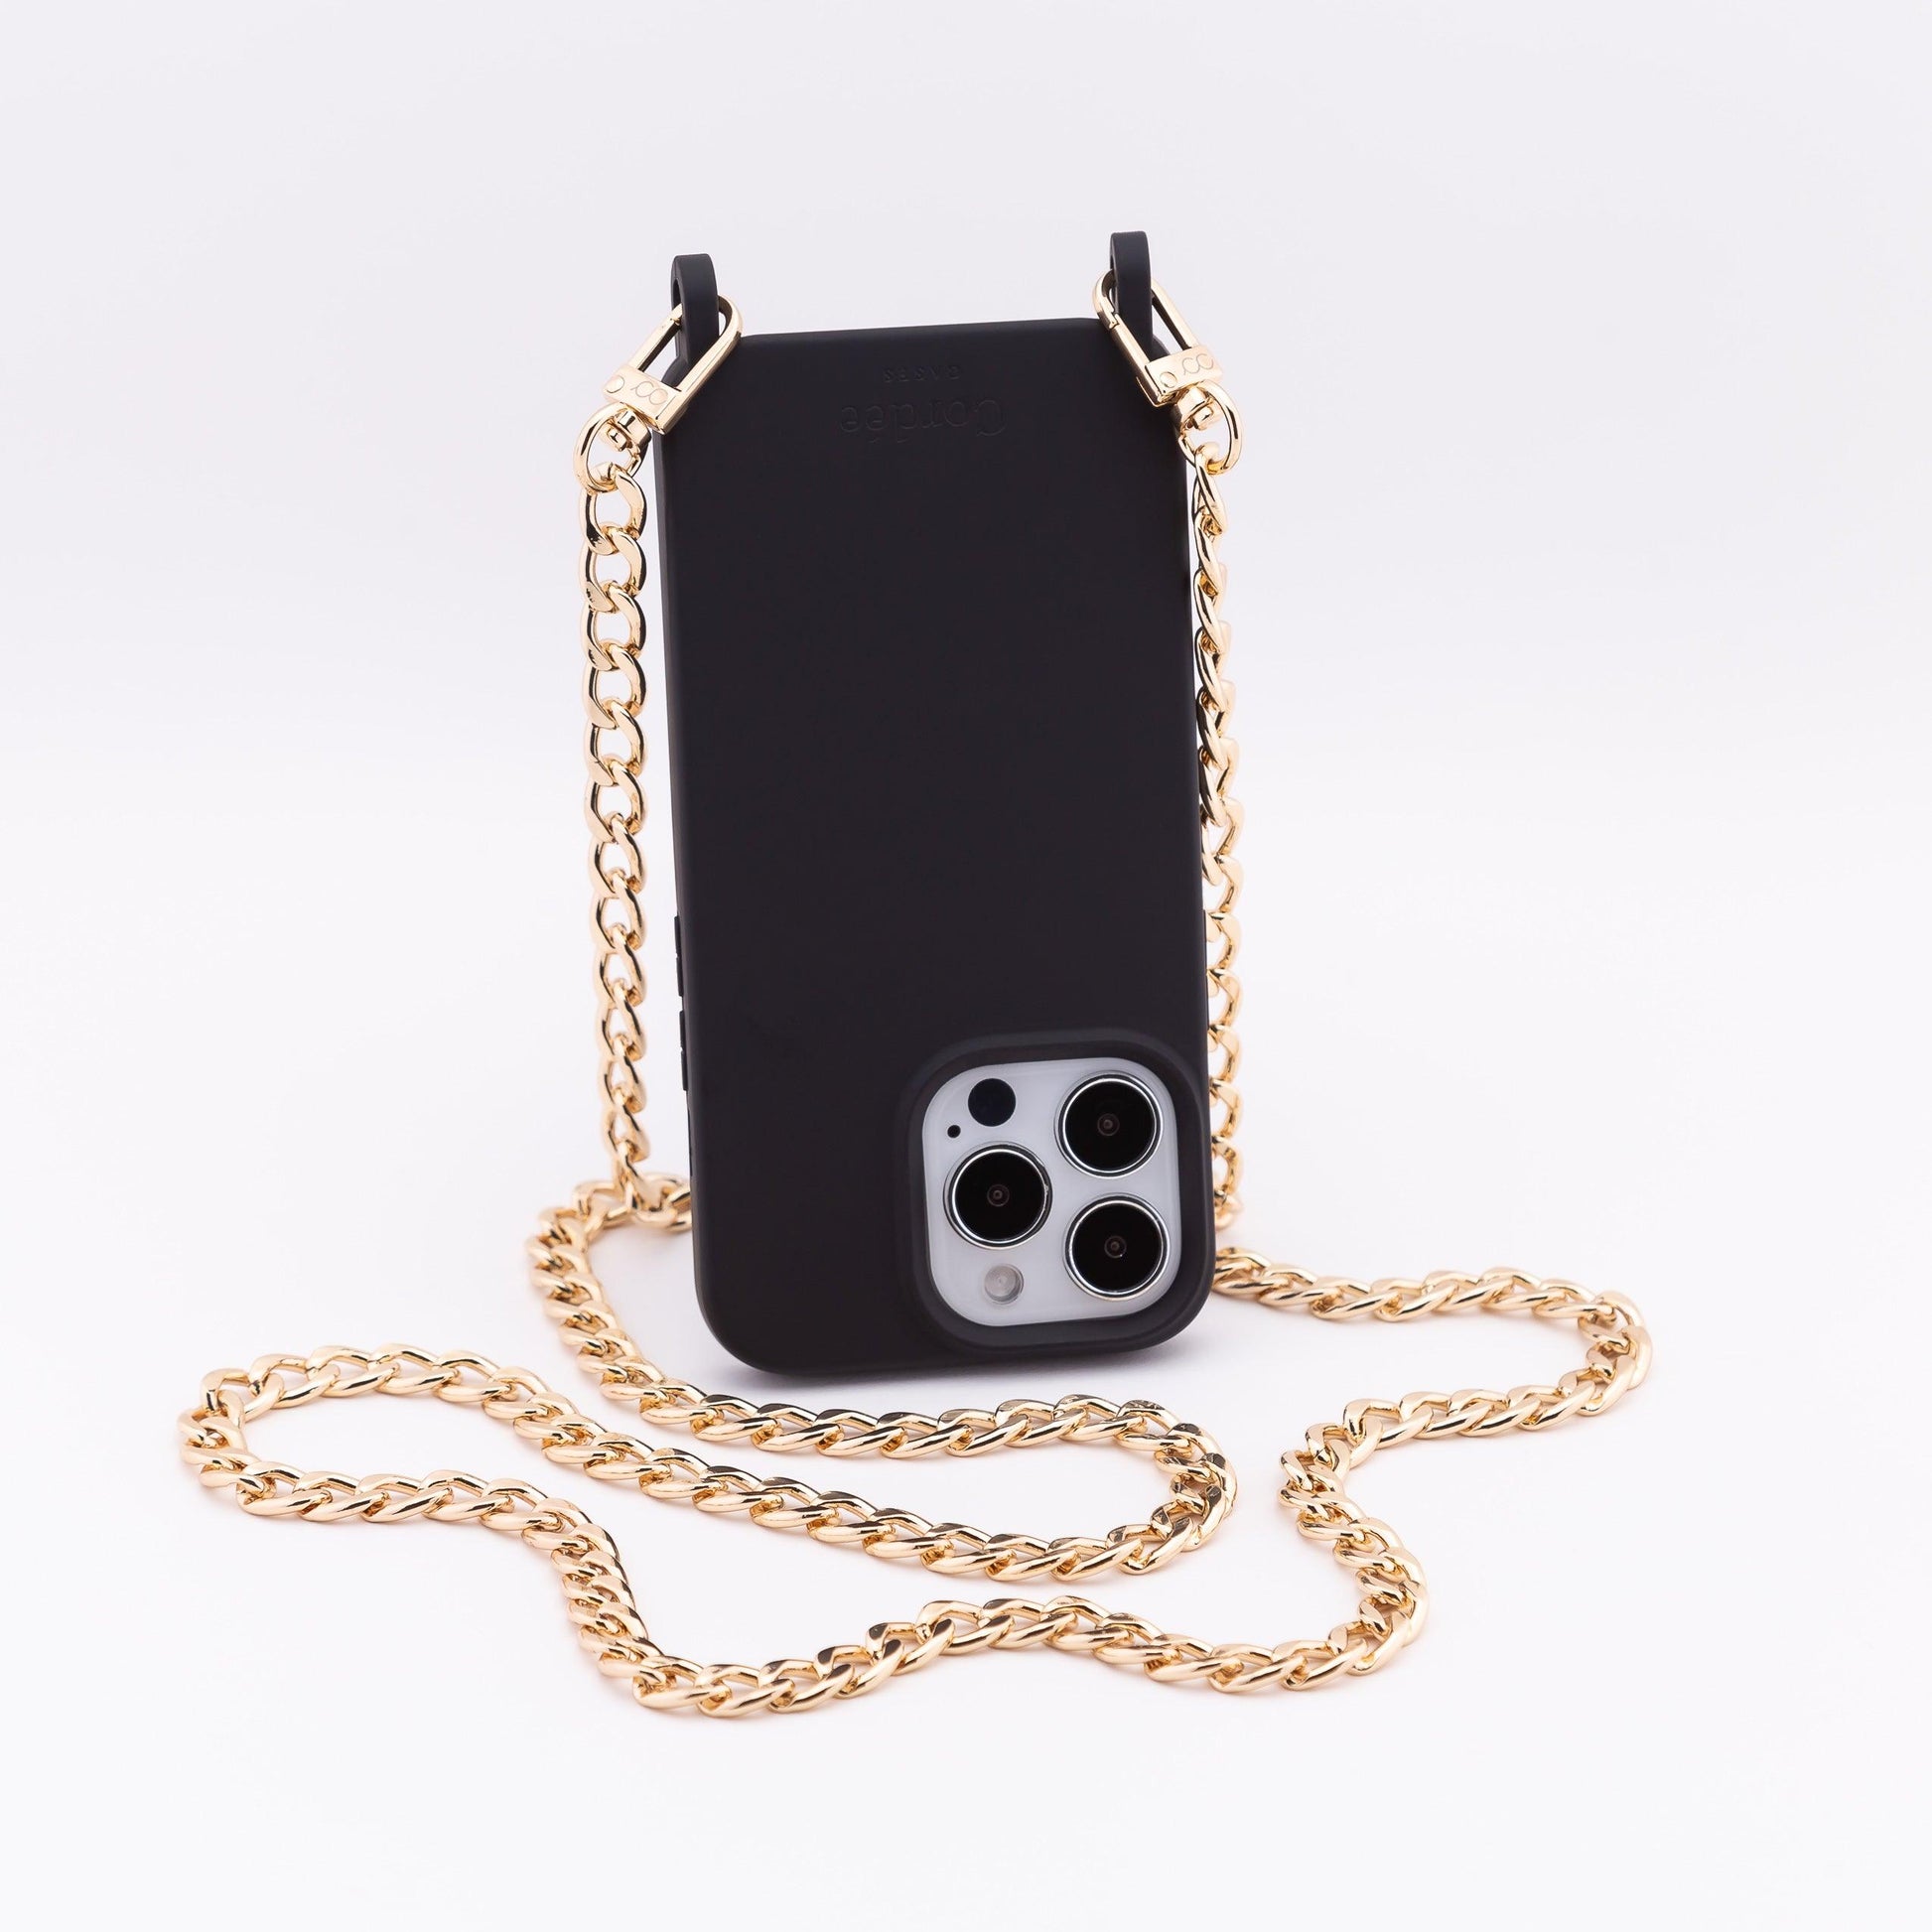 Gold Phone Chain on Black iPhone Case